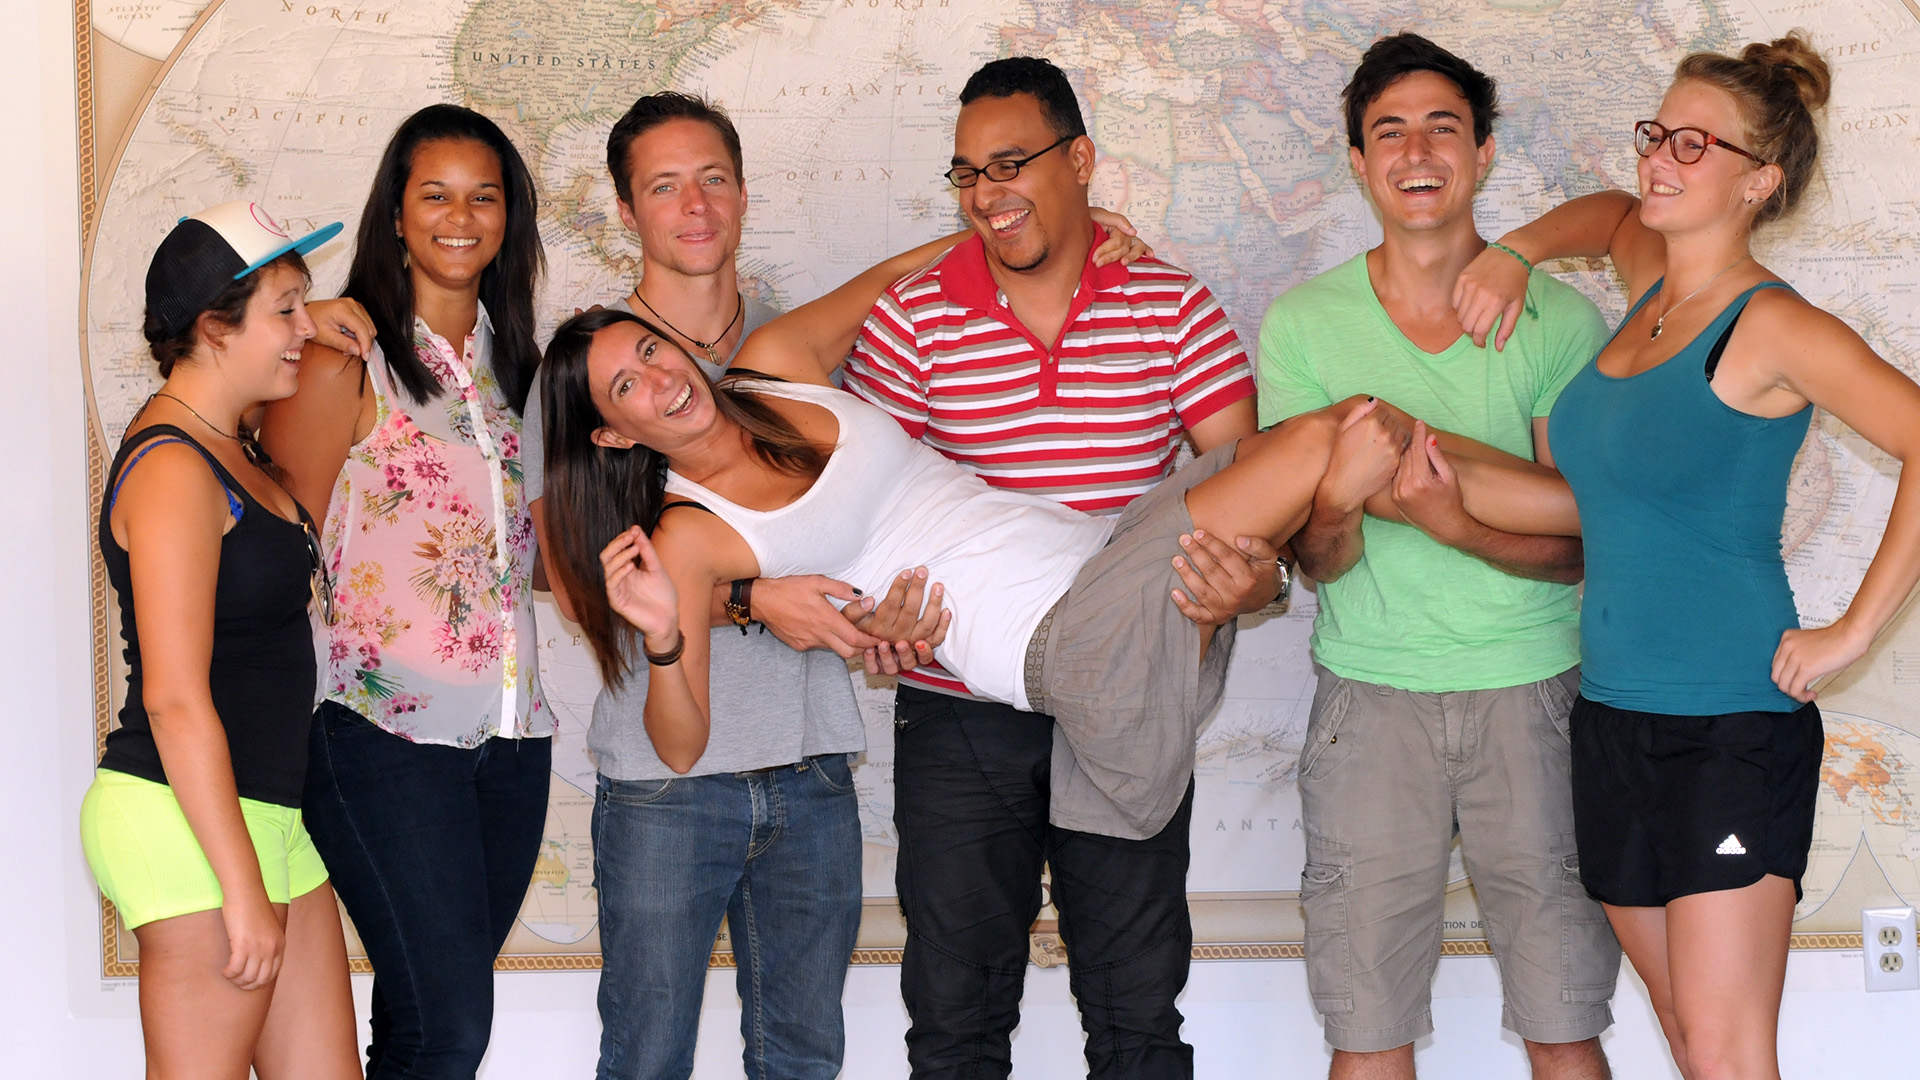 6 people standing in front of a world map, with a 7th person being carried by the group